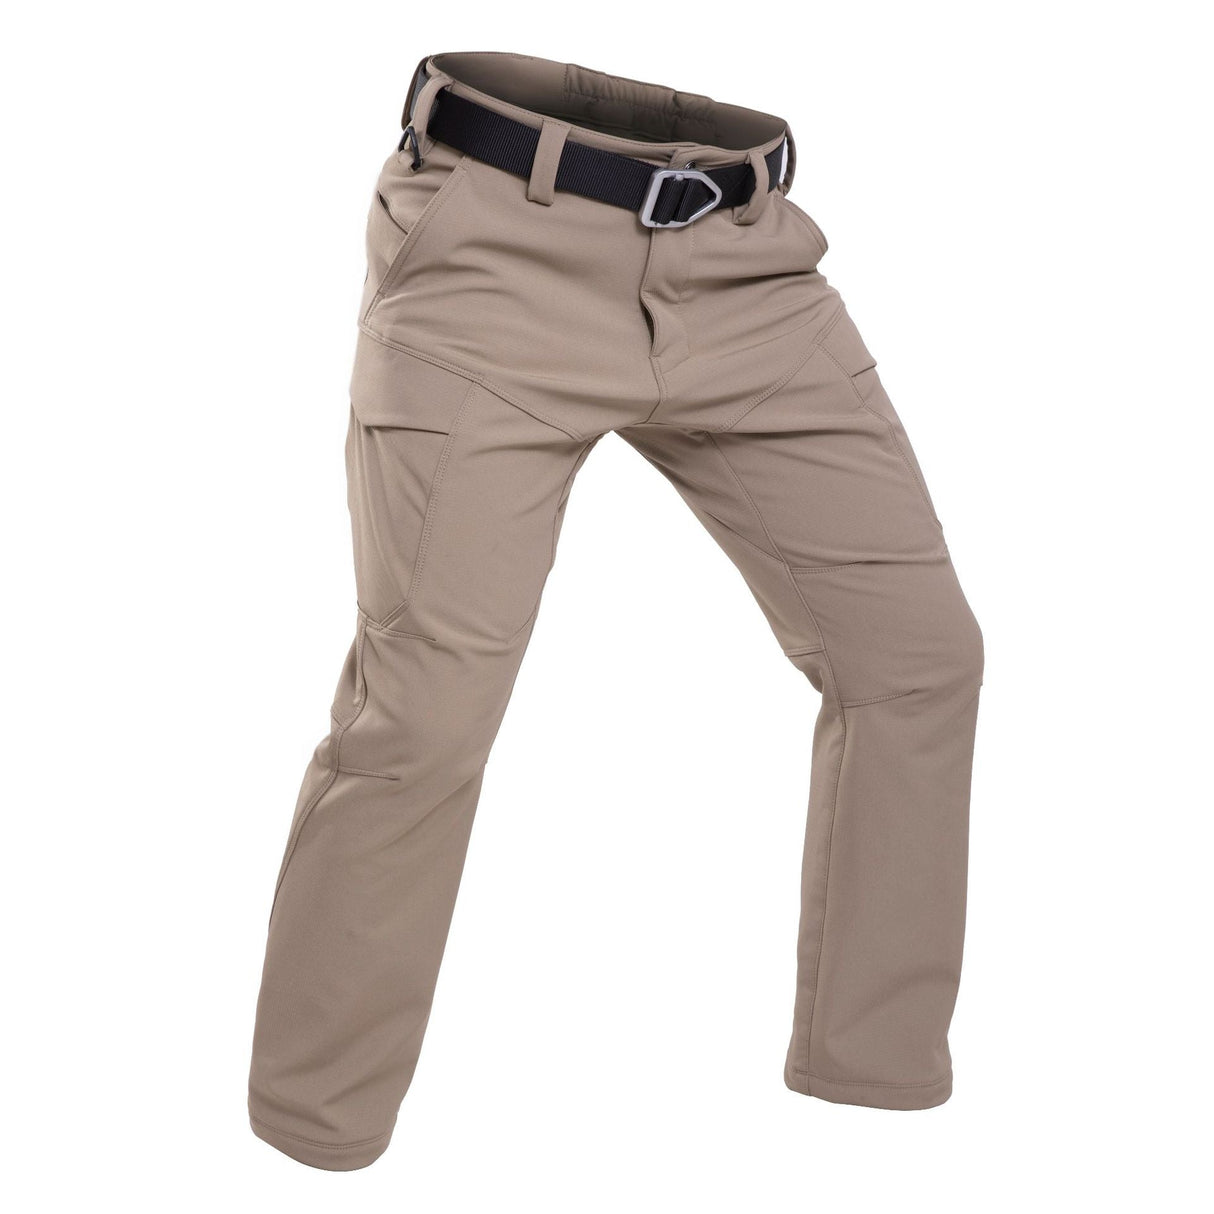 Archon Winter-Ready Tactical Pants | Waterproof